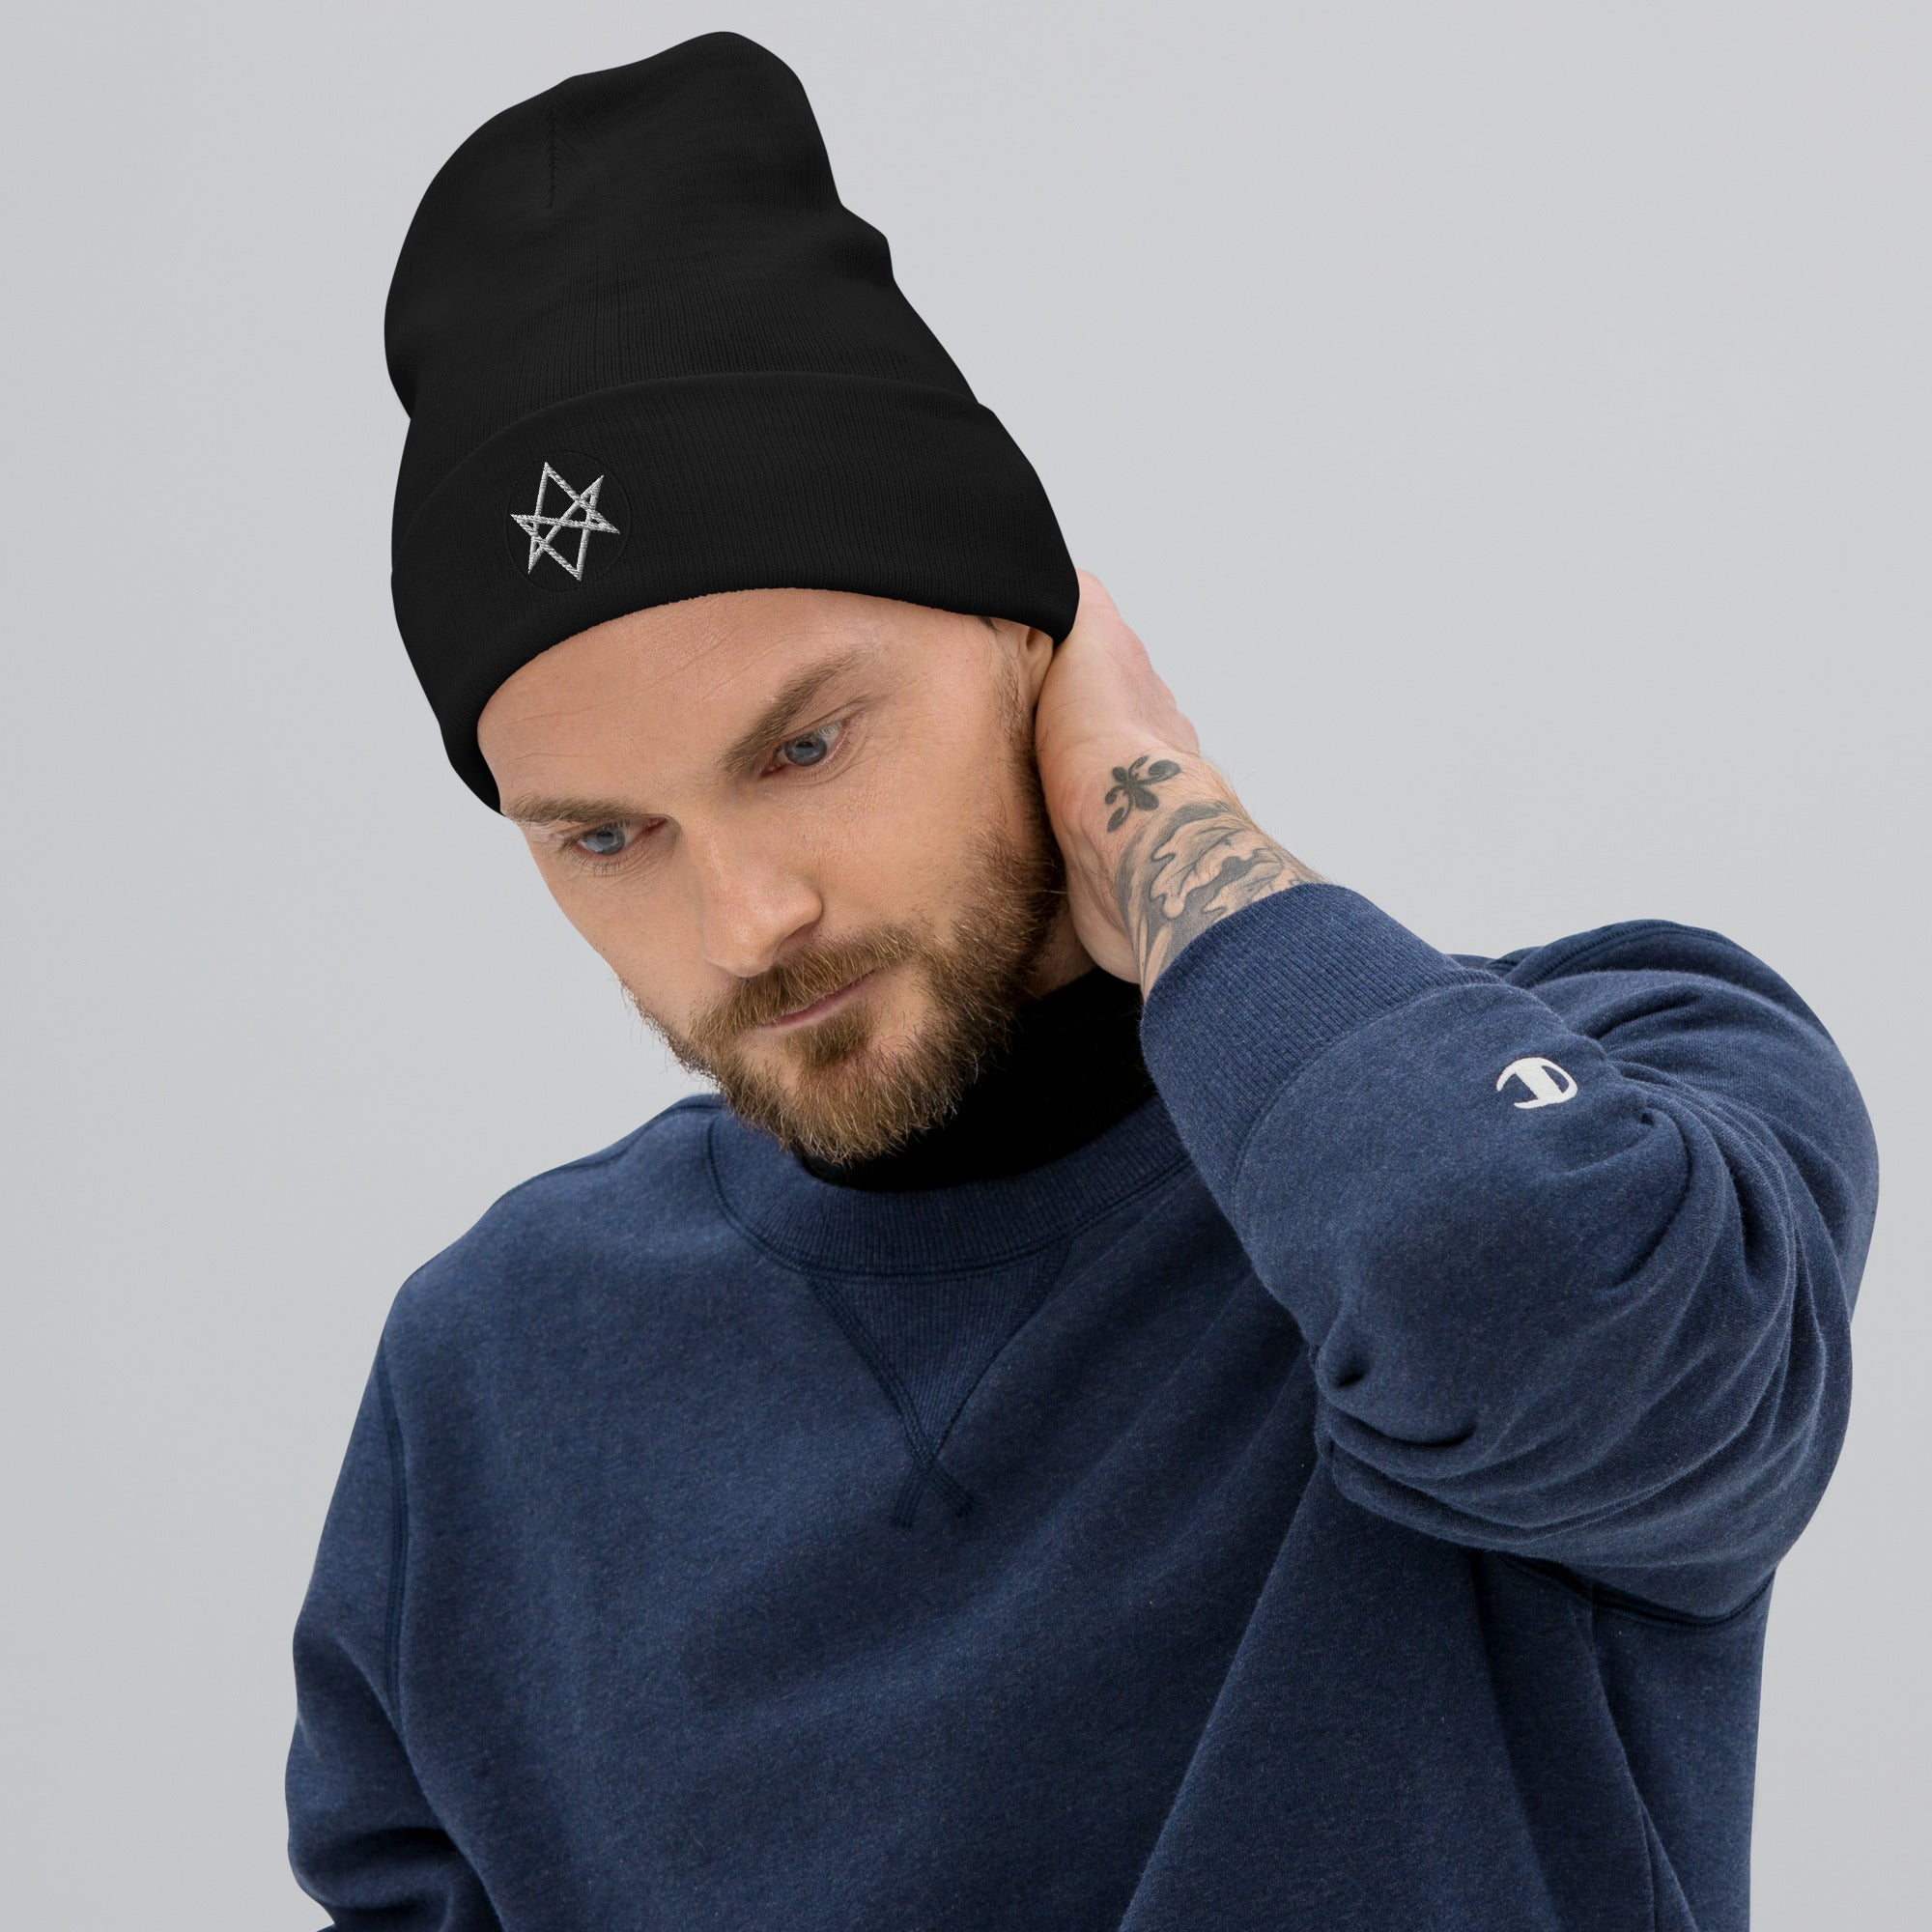 Unicursal Hexagram Six Pointed Star Occult Symbol Embroidered Cuff Beanie - Edge of Life Designs